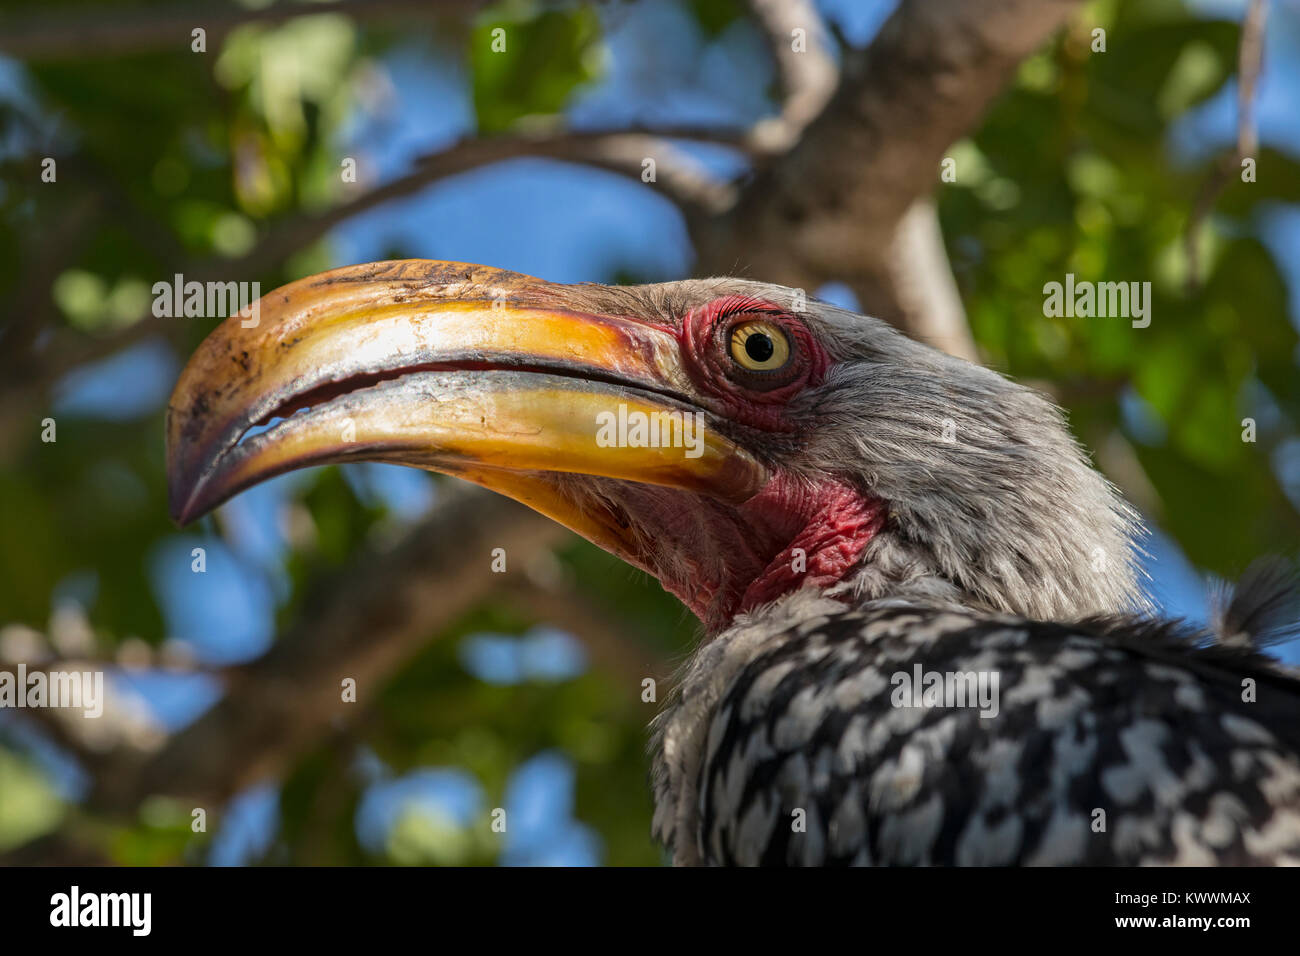 Close-up of Southern Yellow-billed Hornbill (Tockus leucomelas) Stock Photo